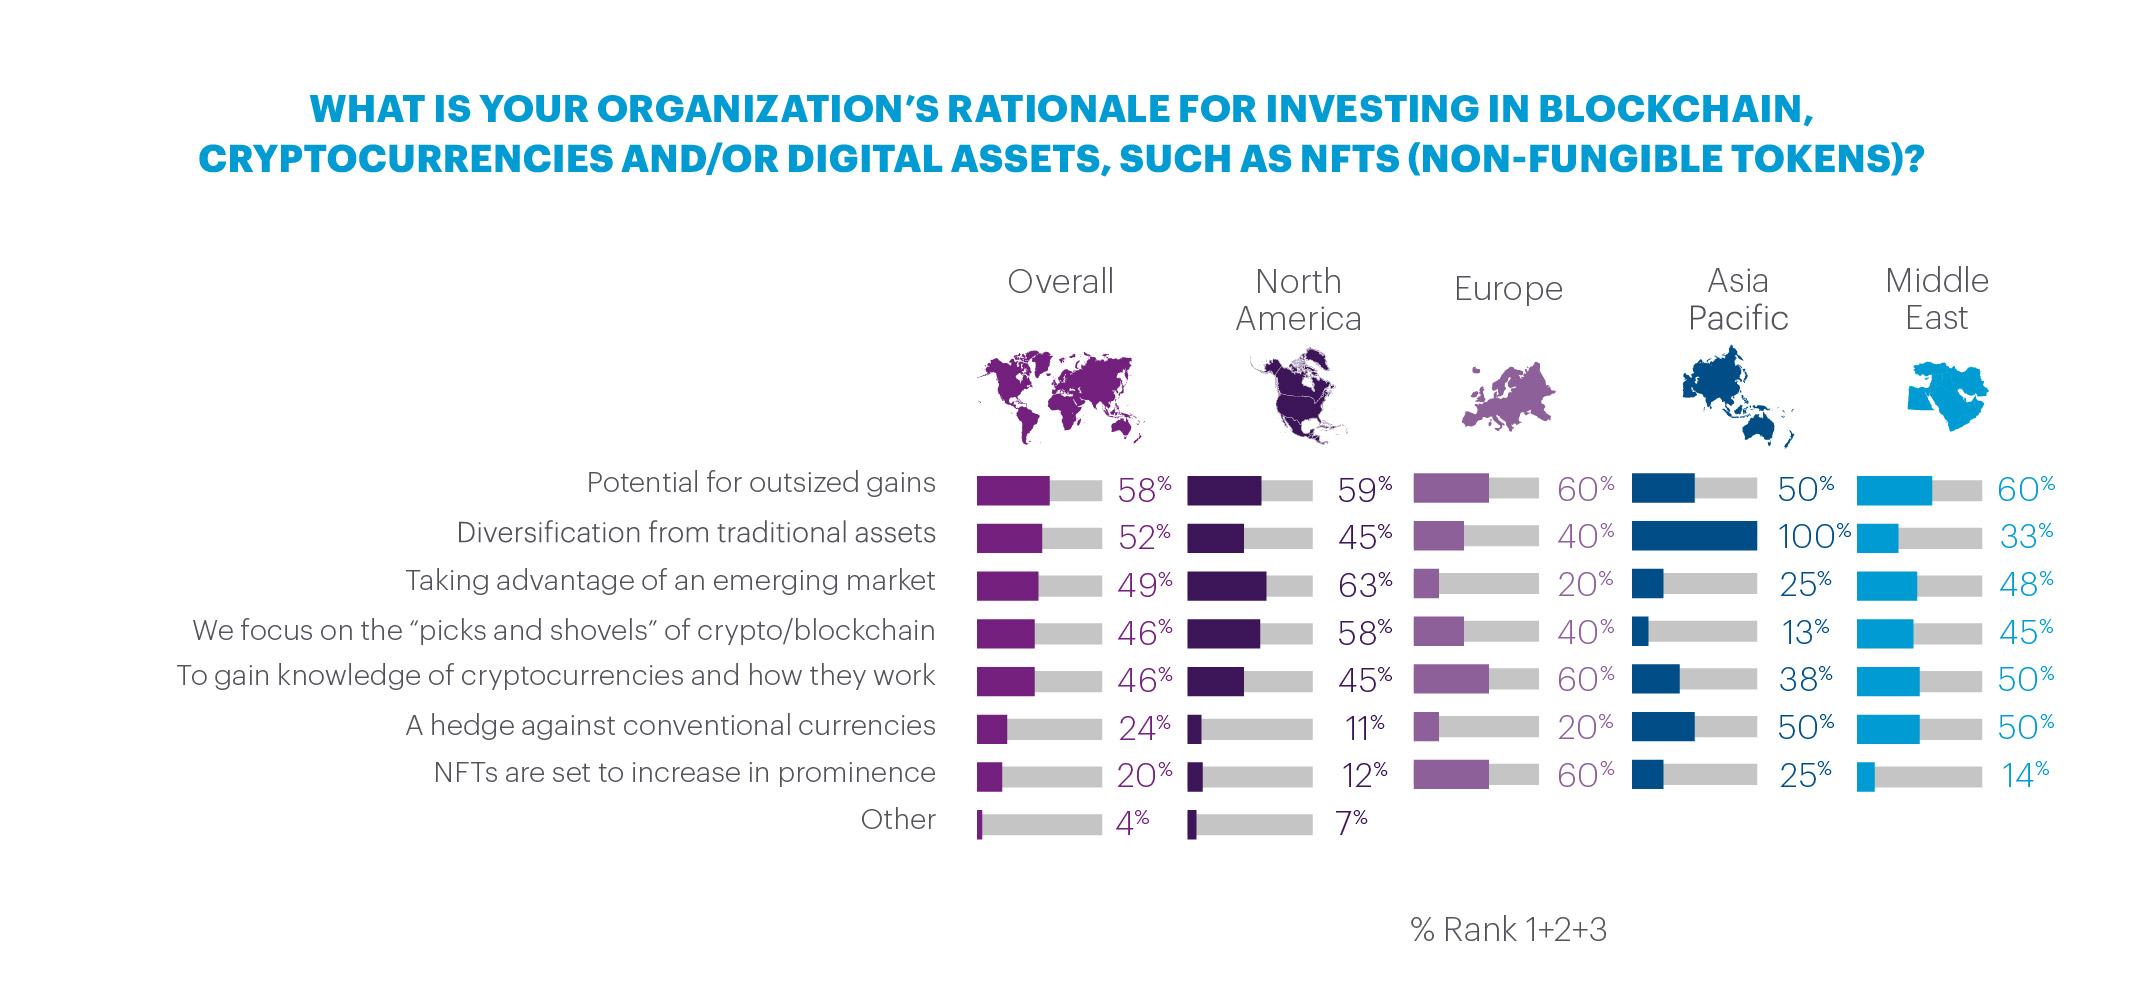 Regional percentages and list of rationale for investing in crypto, blockchain, and digital assets